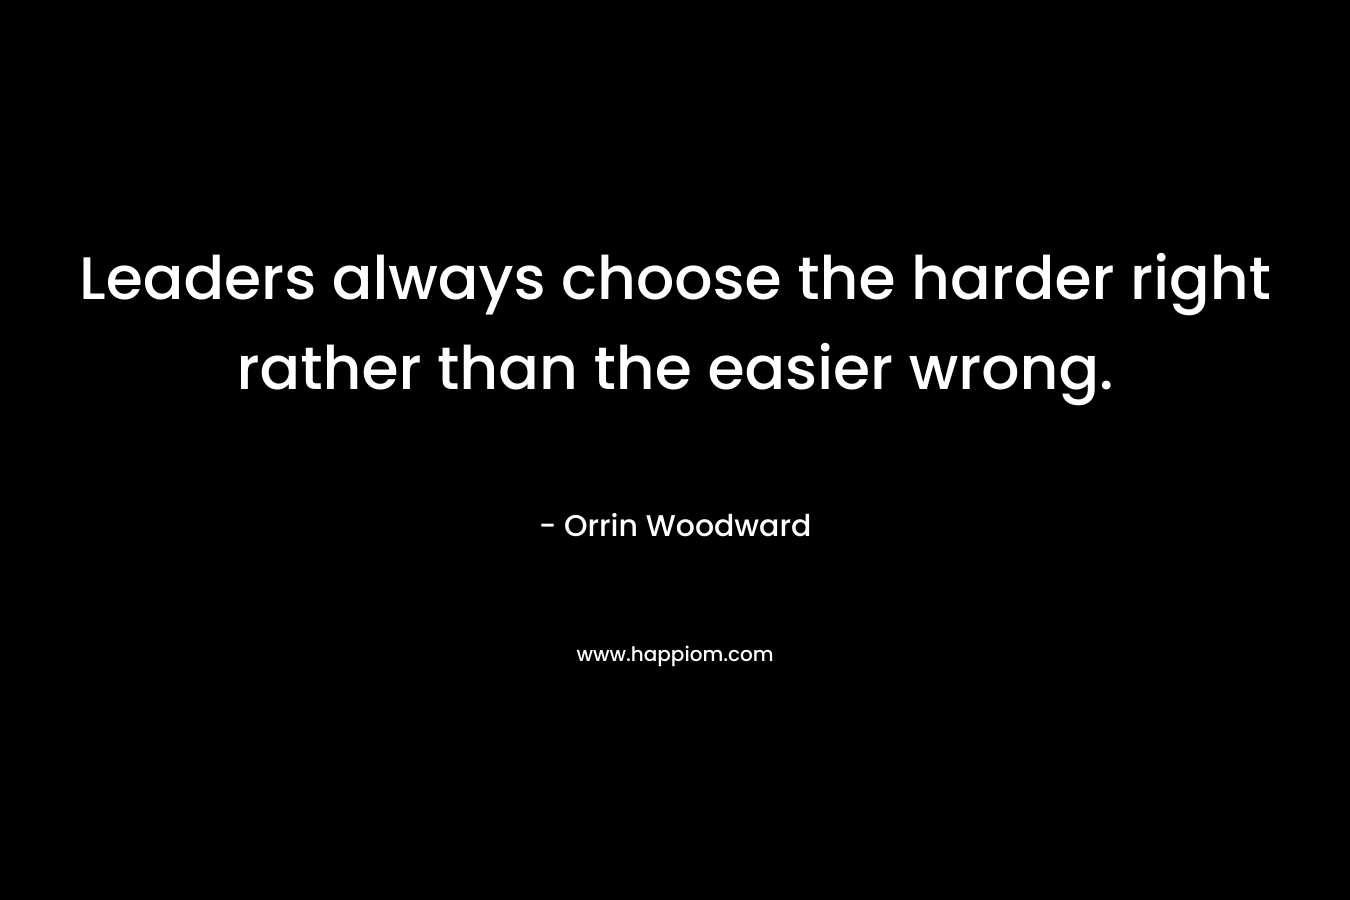 Leaders always choose the harder right rather than the easier wrong.